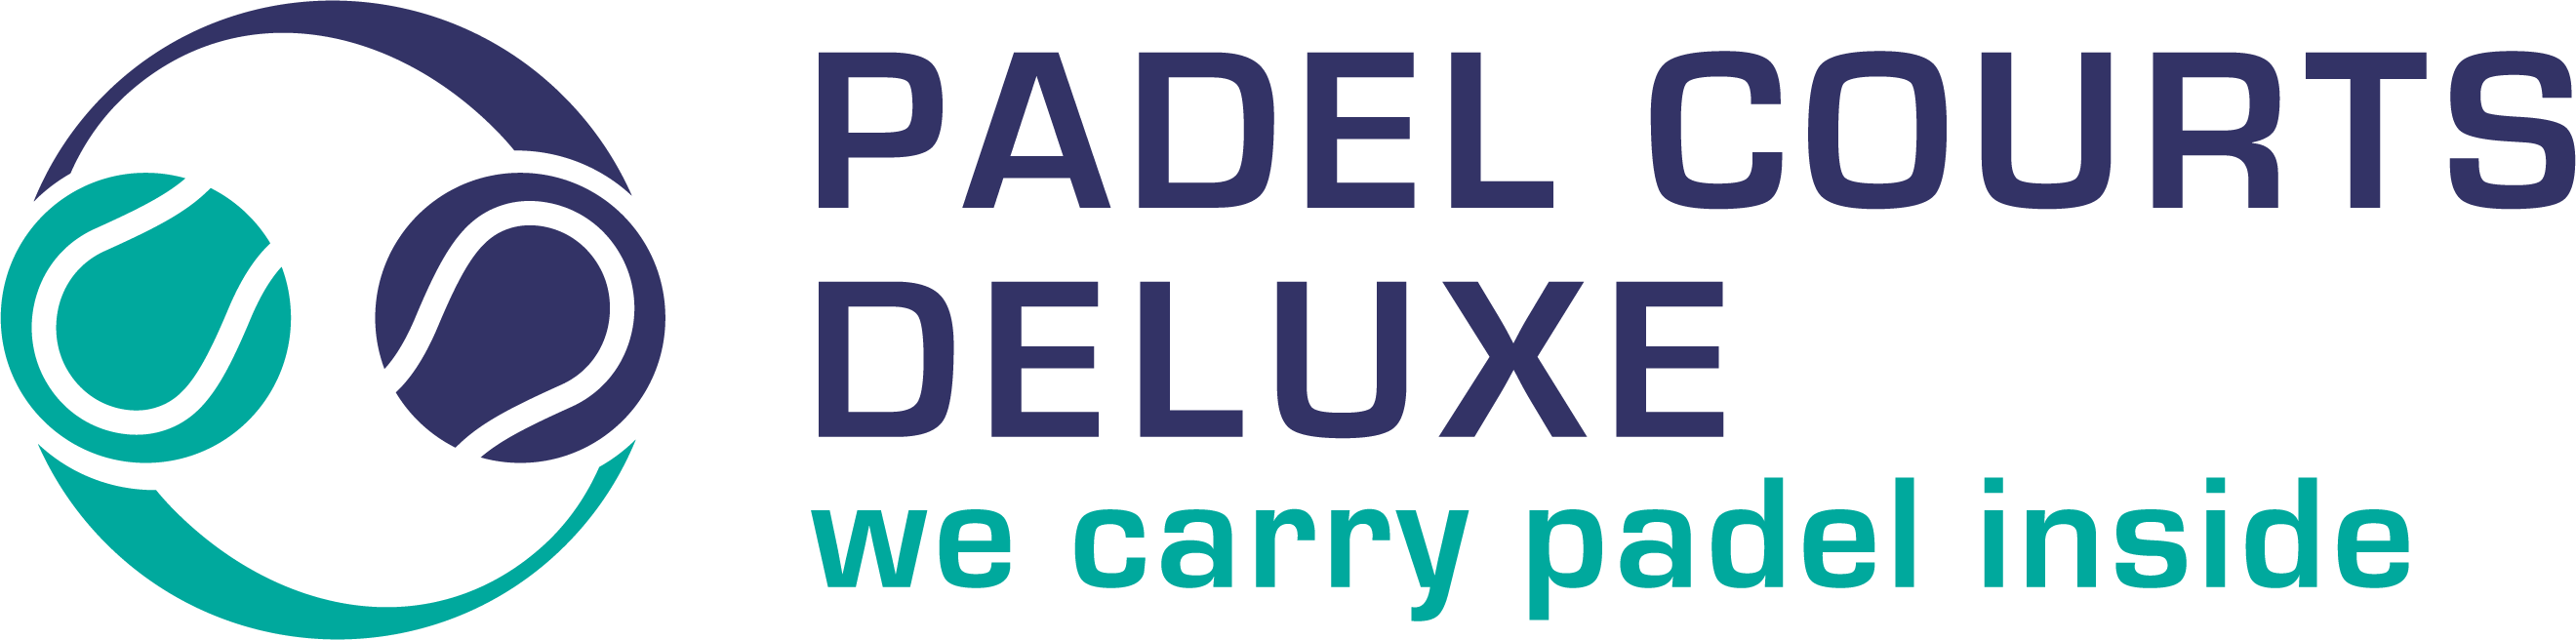 Padel Courts Deluxe PCDLX Logo